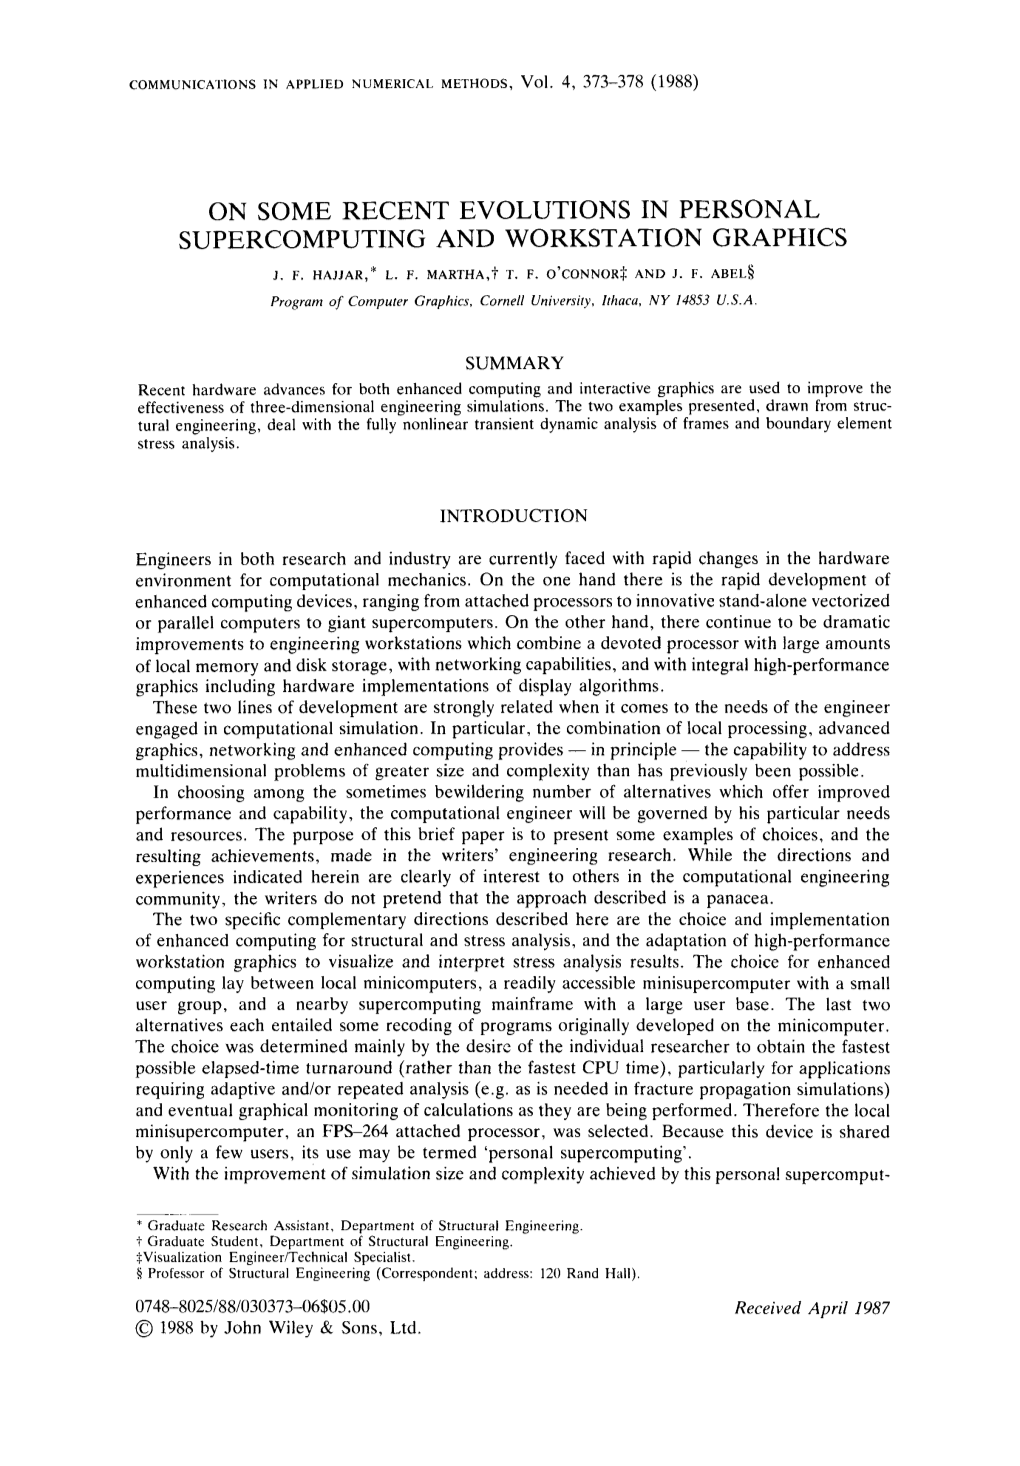 On Some Recent Evolutions in Personal Supercomputing and Workstation Graphics J